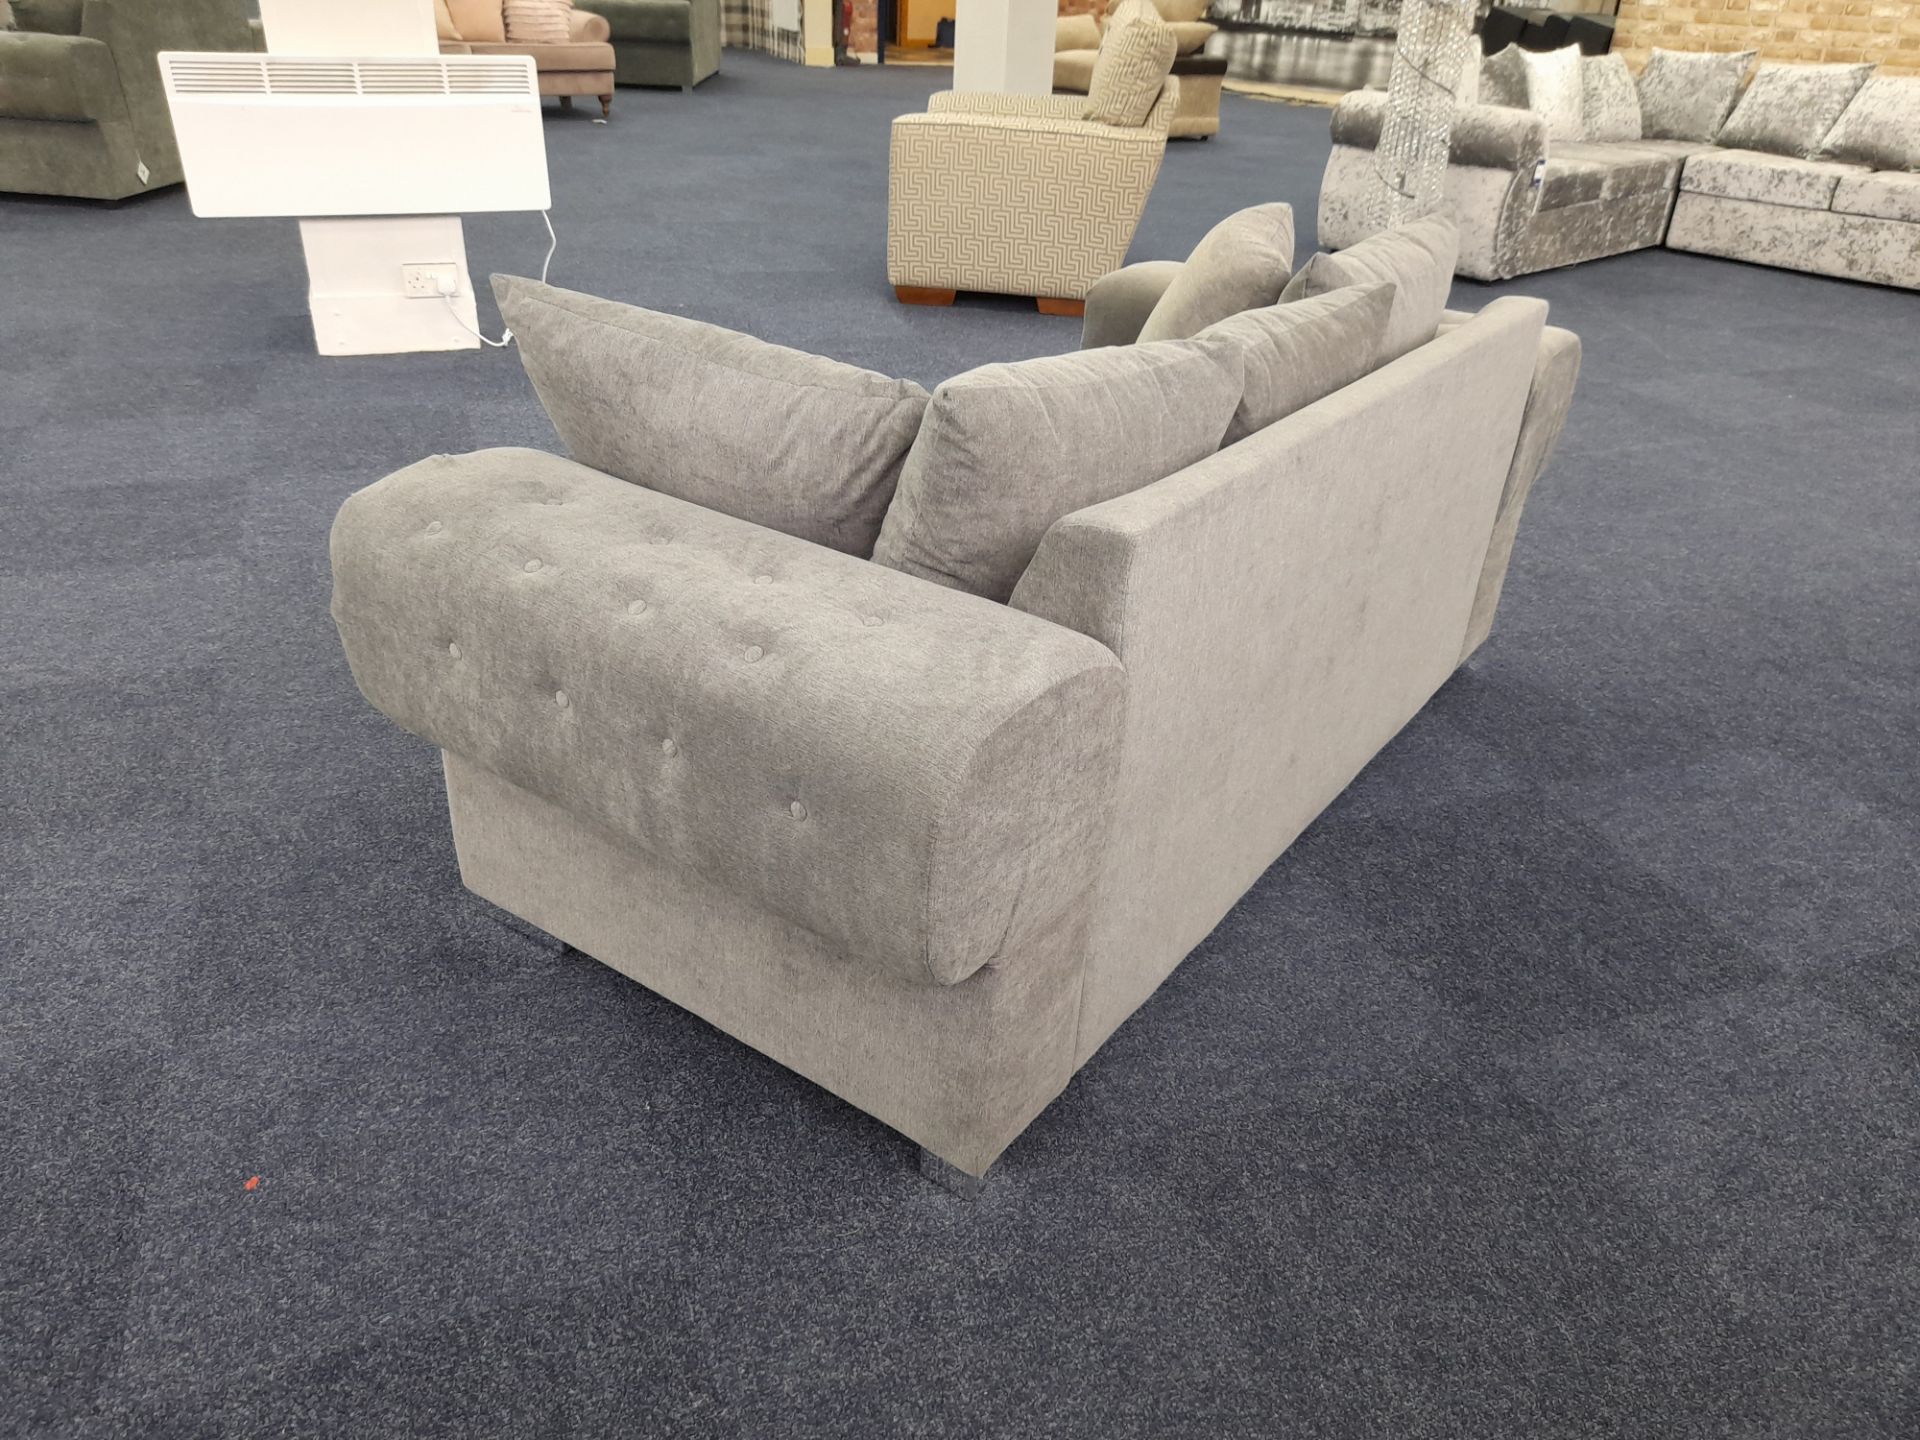 Grey fabric upholstered, 3 seater, scatter cushioned back sofa (Ex-Display) - Image 4 of 6